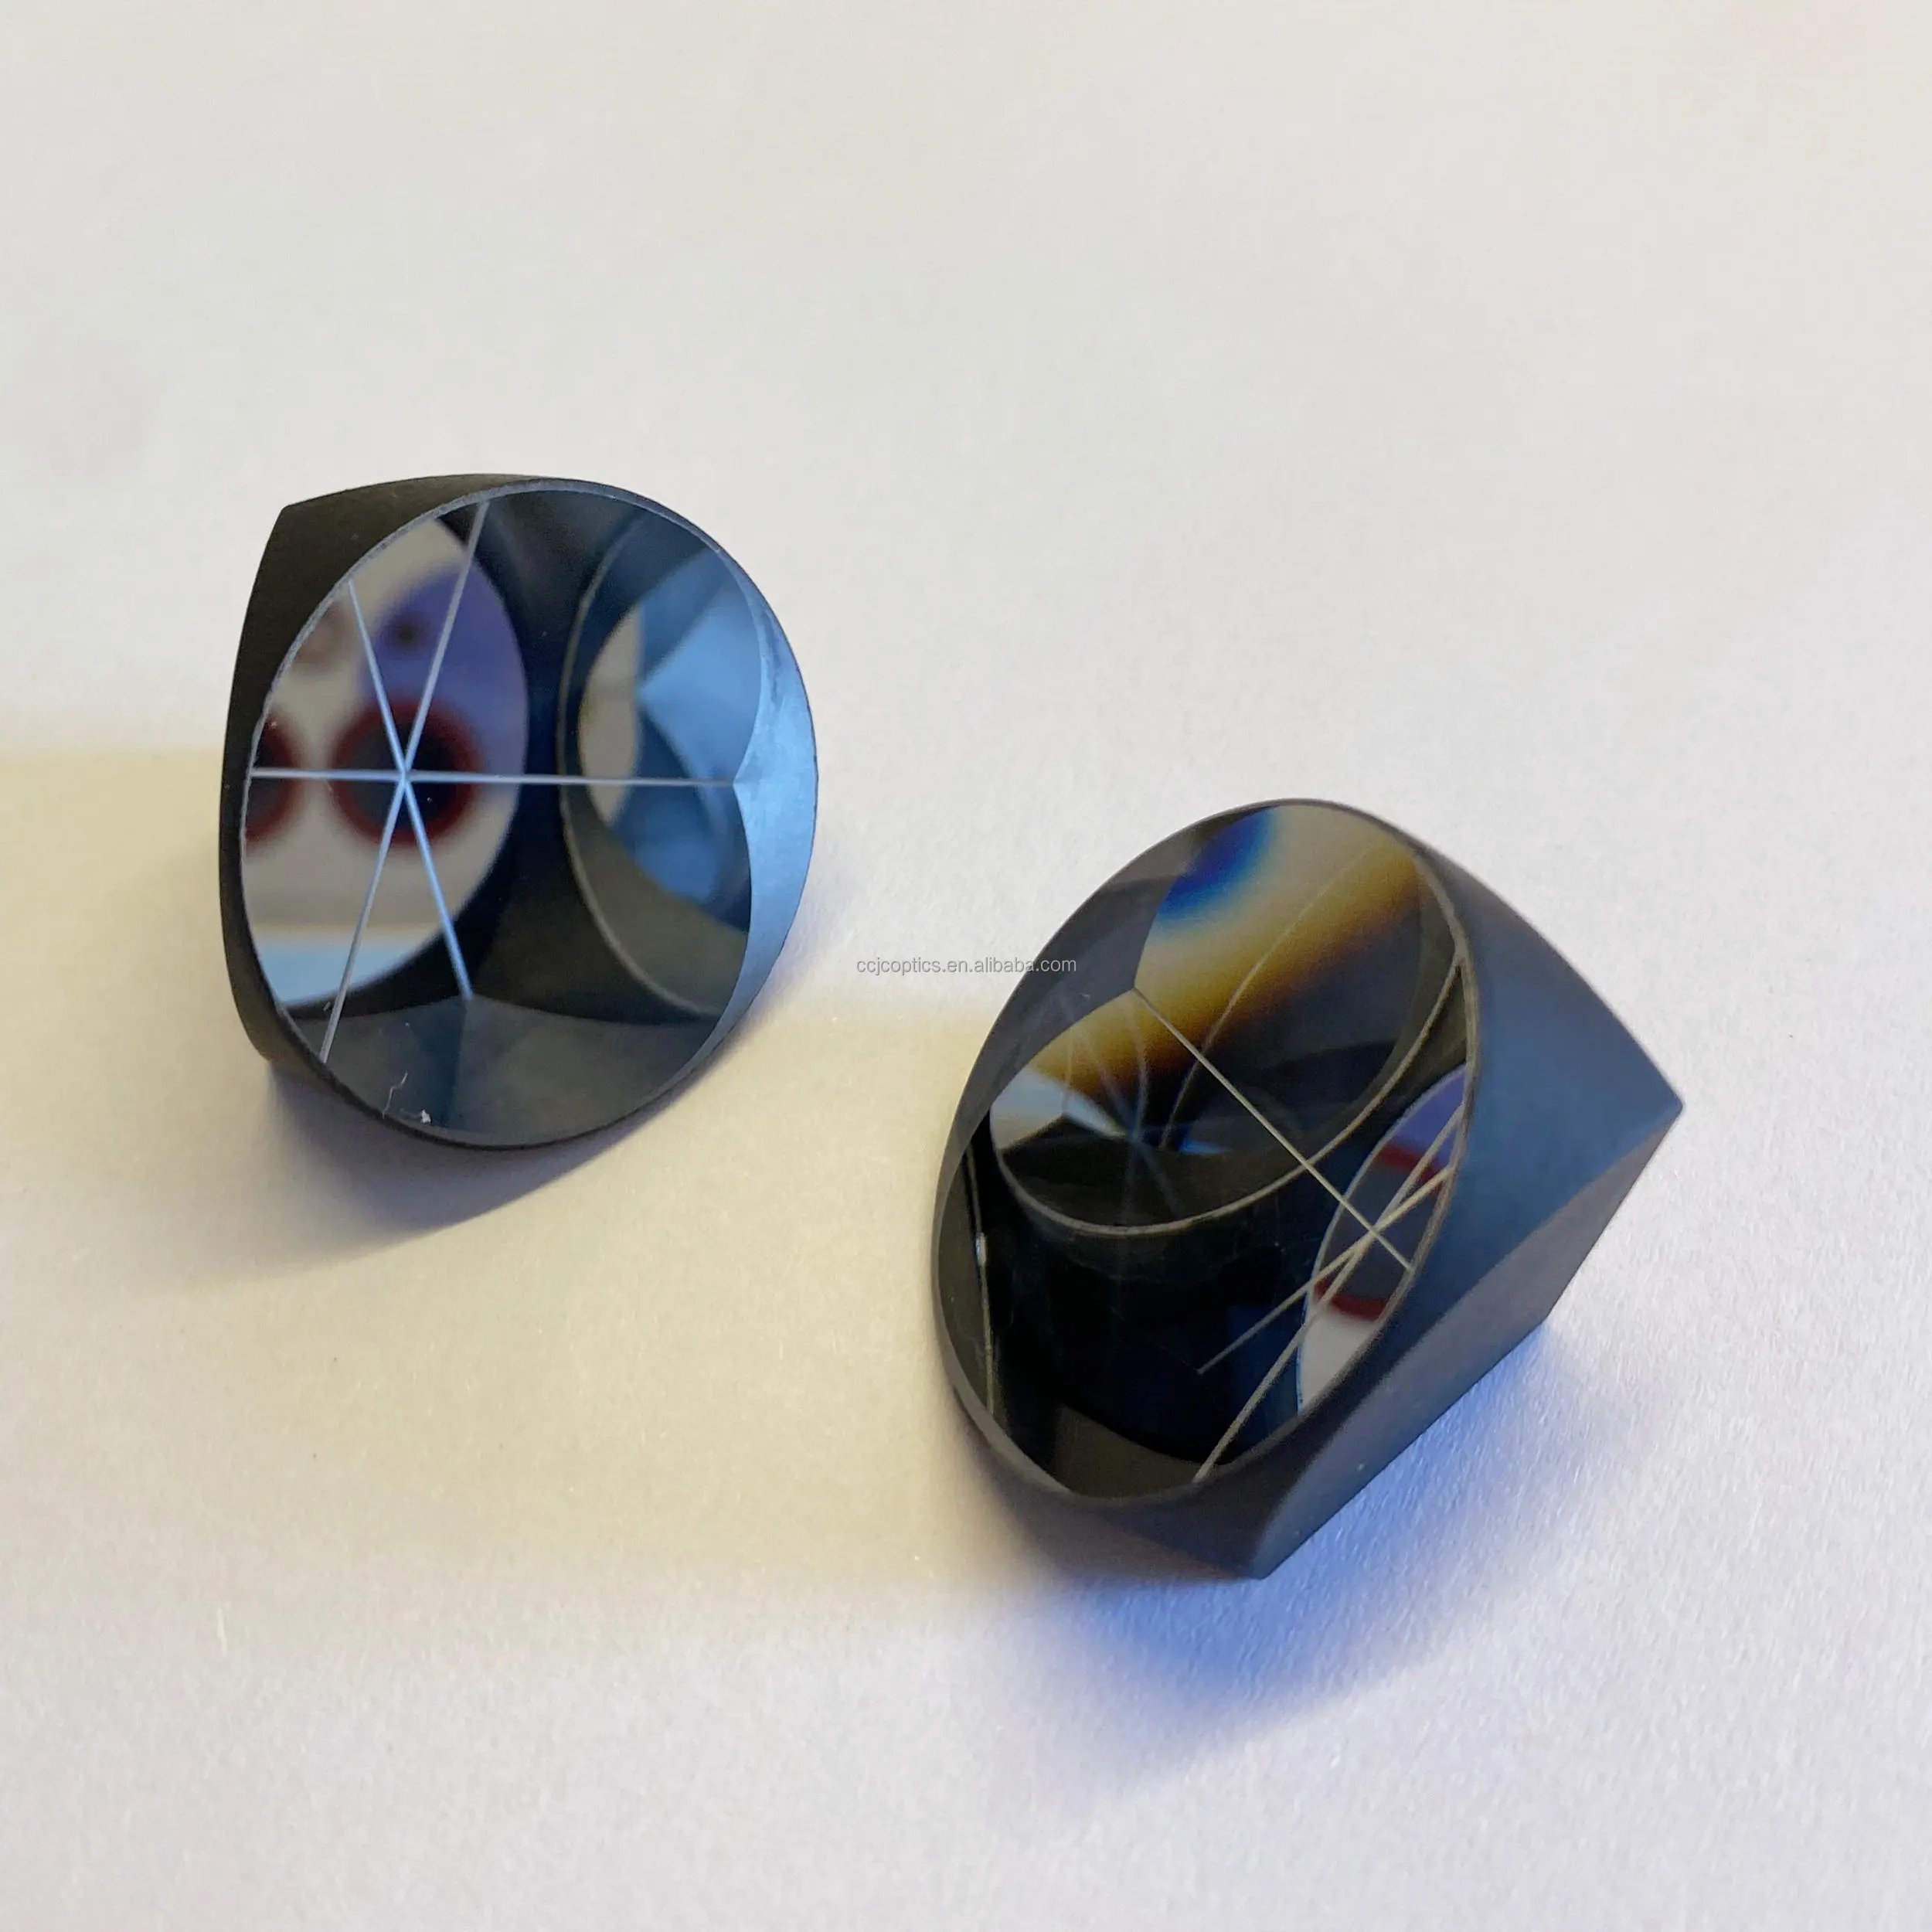 25.4mm Reflection Angle Cone Prism With Black Coating total station corner cube